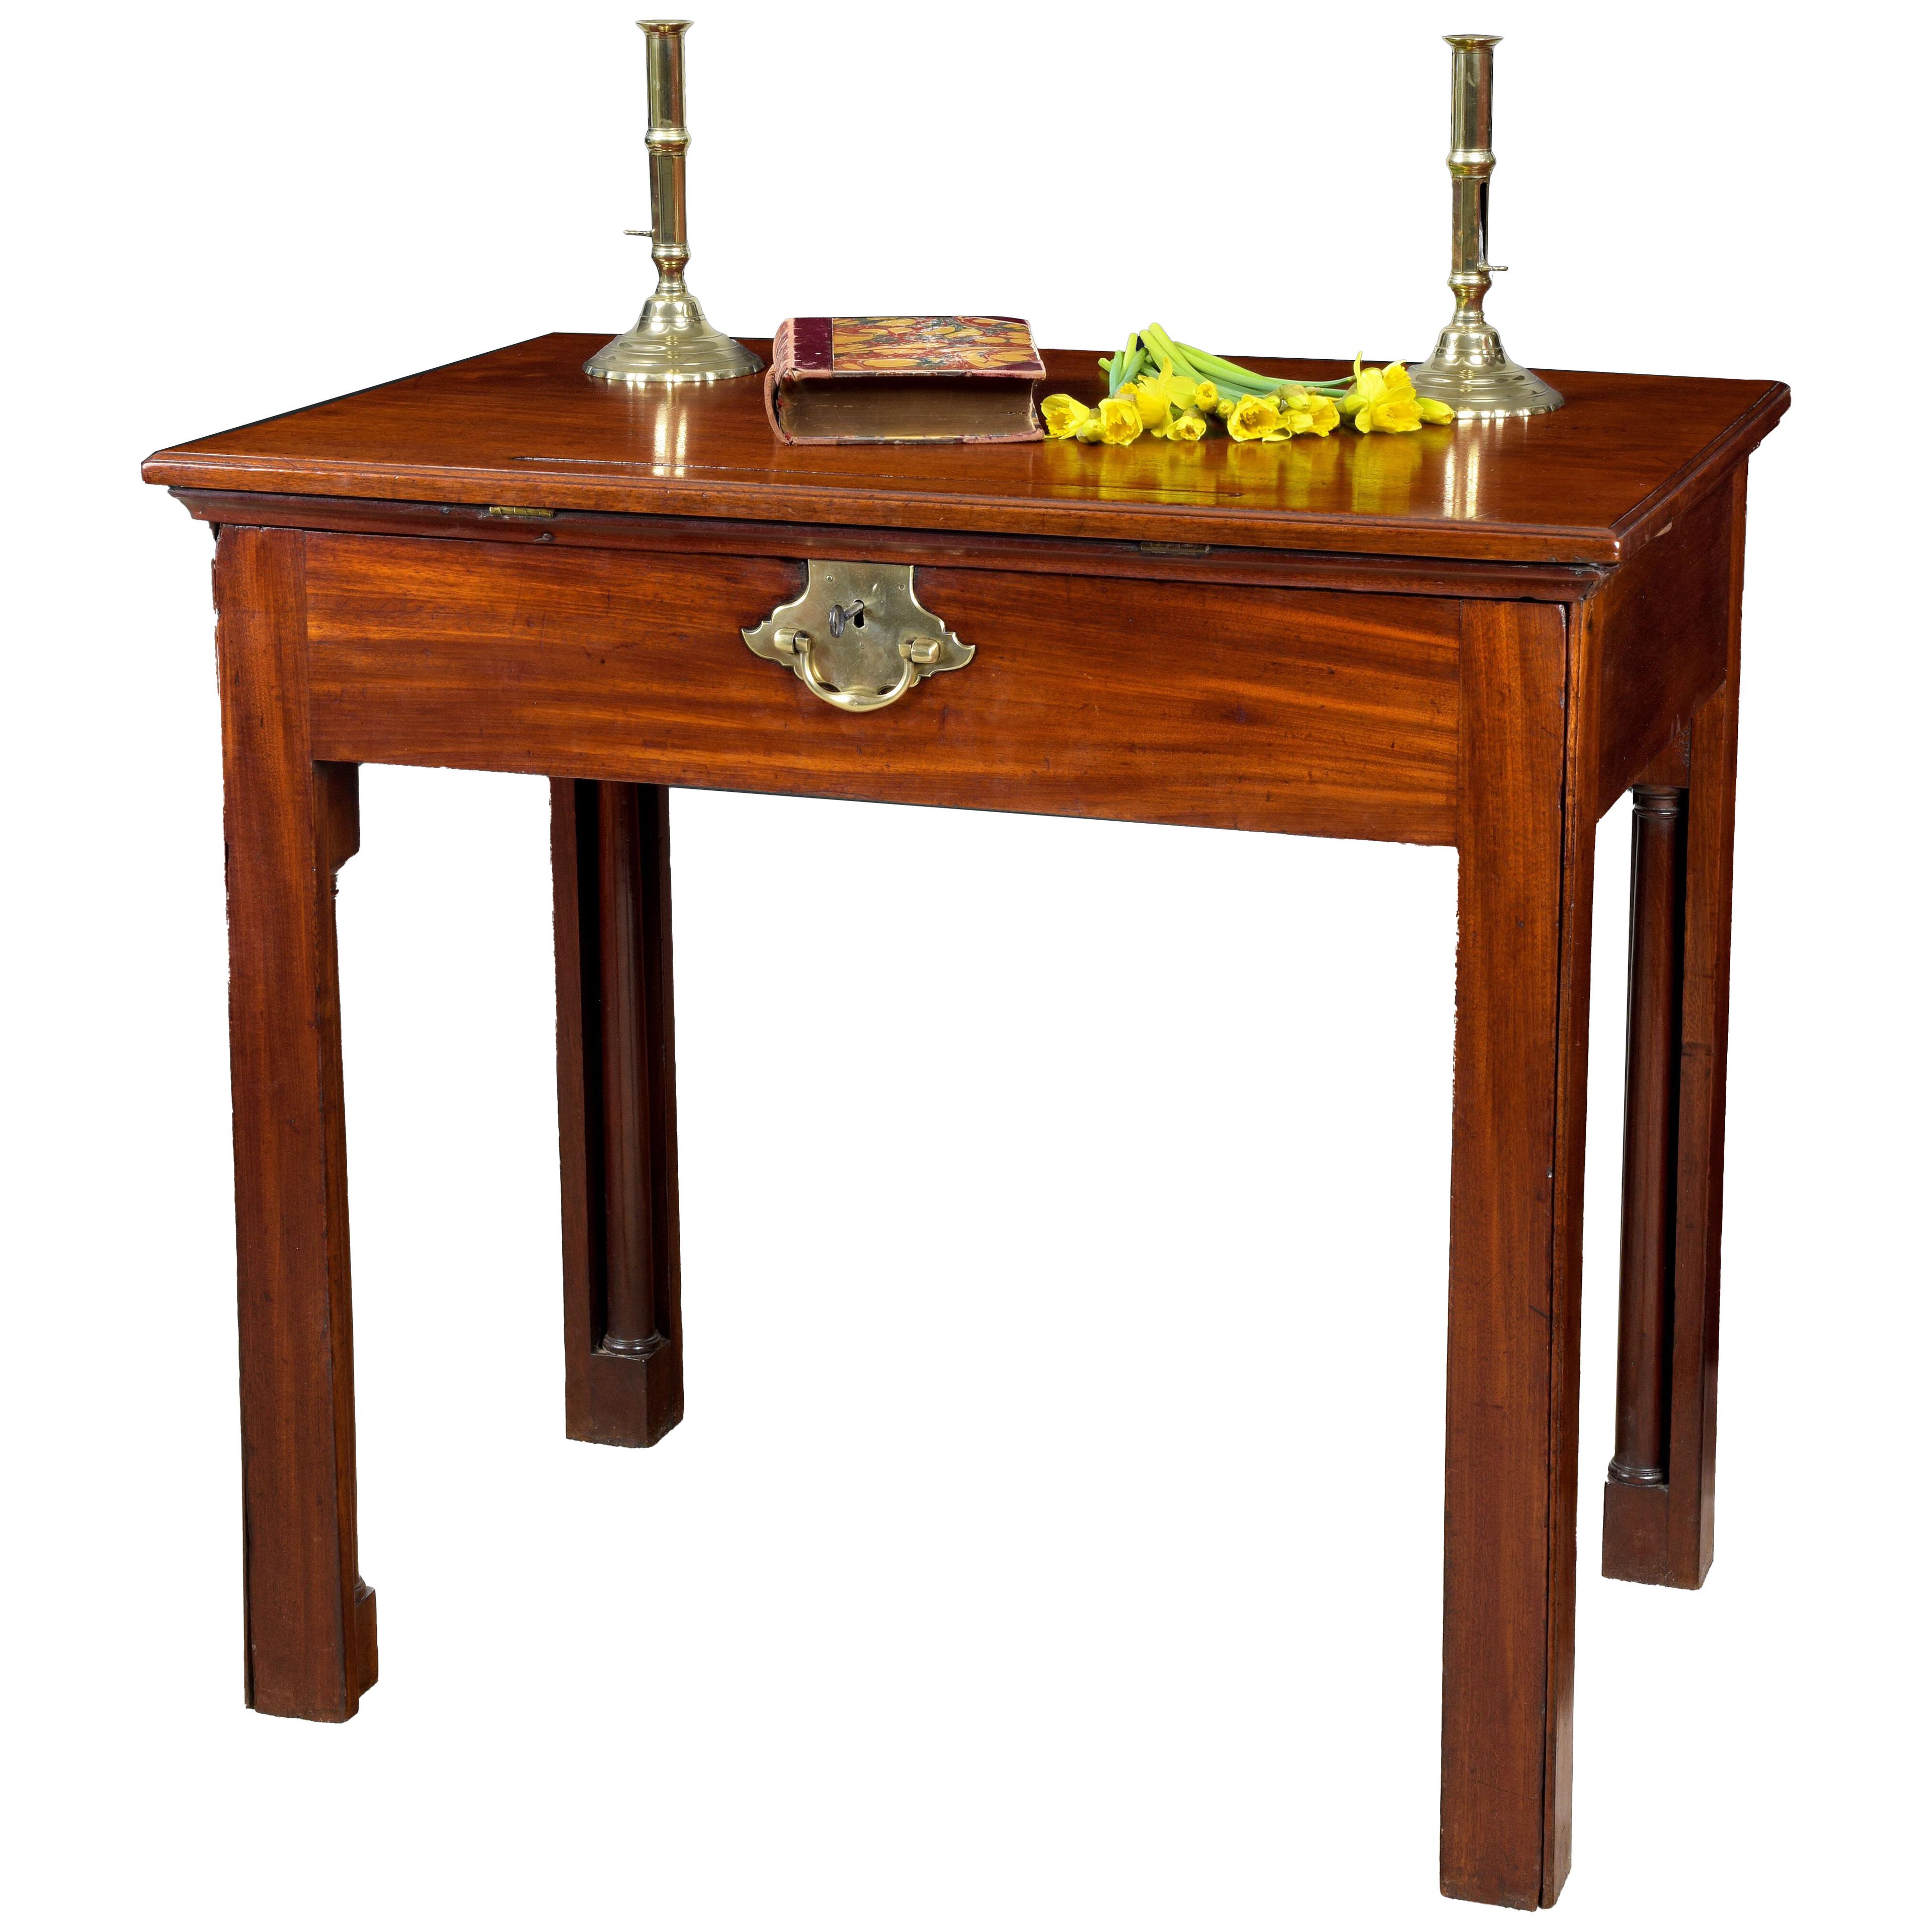 Chippendale Period Mahogany Architect's Table